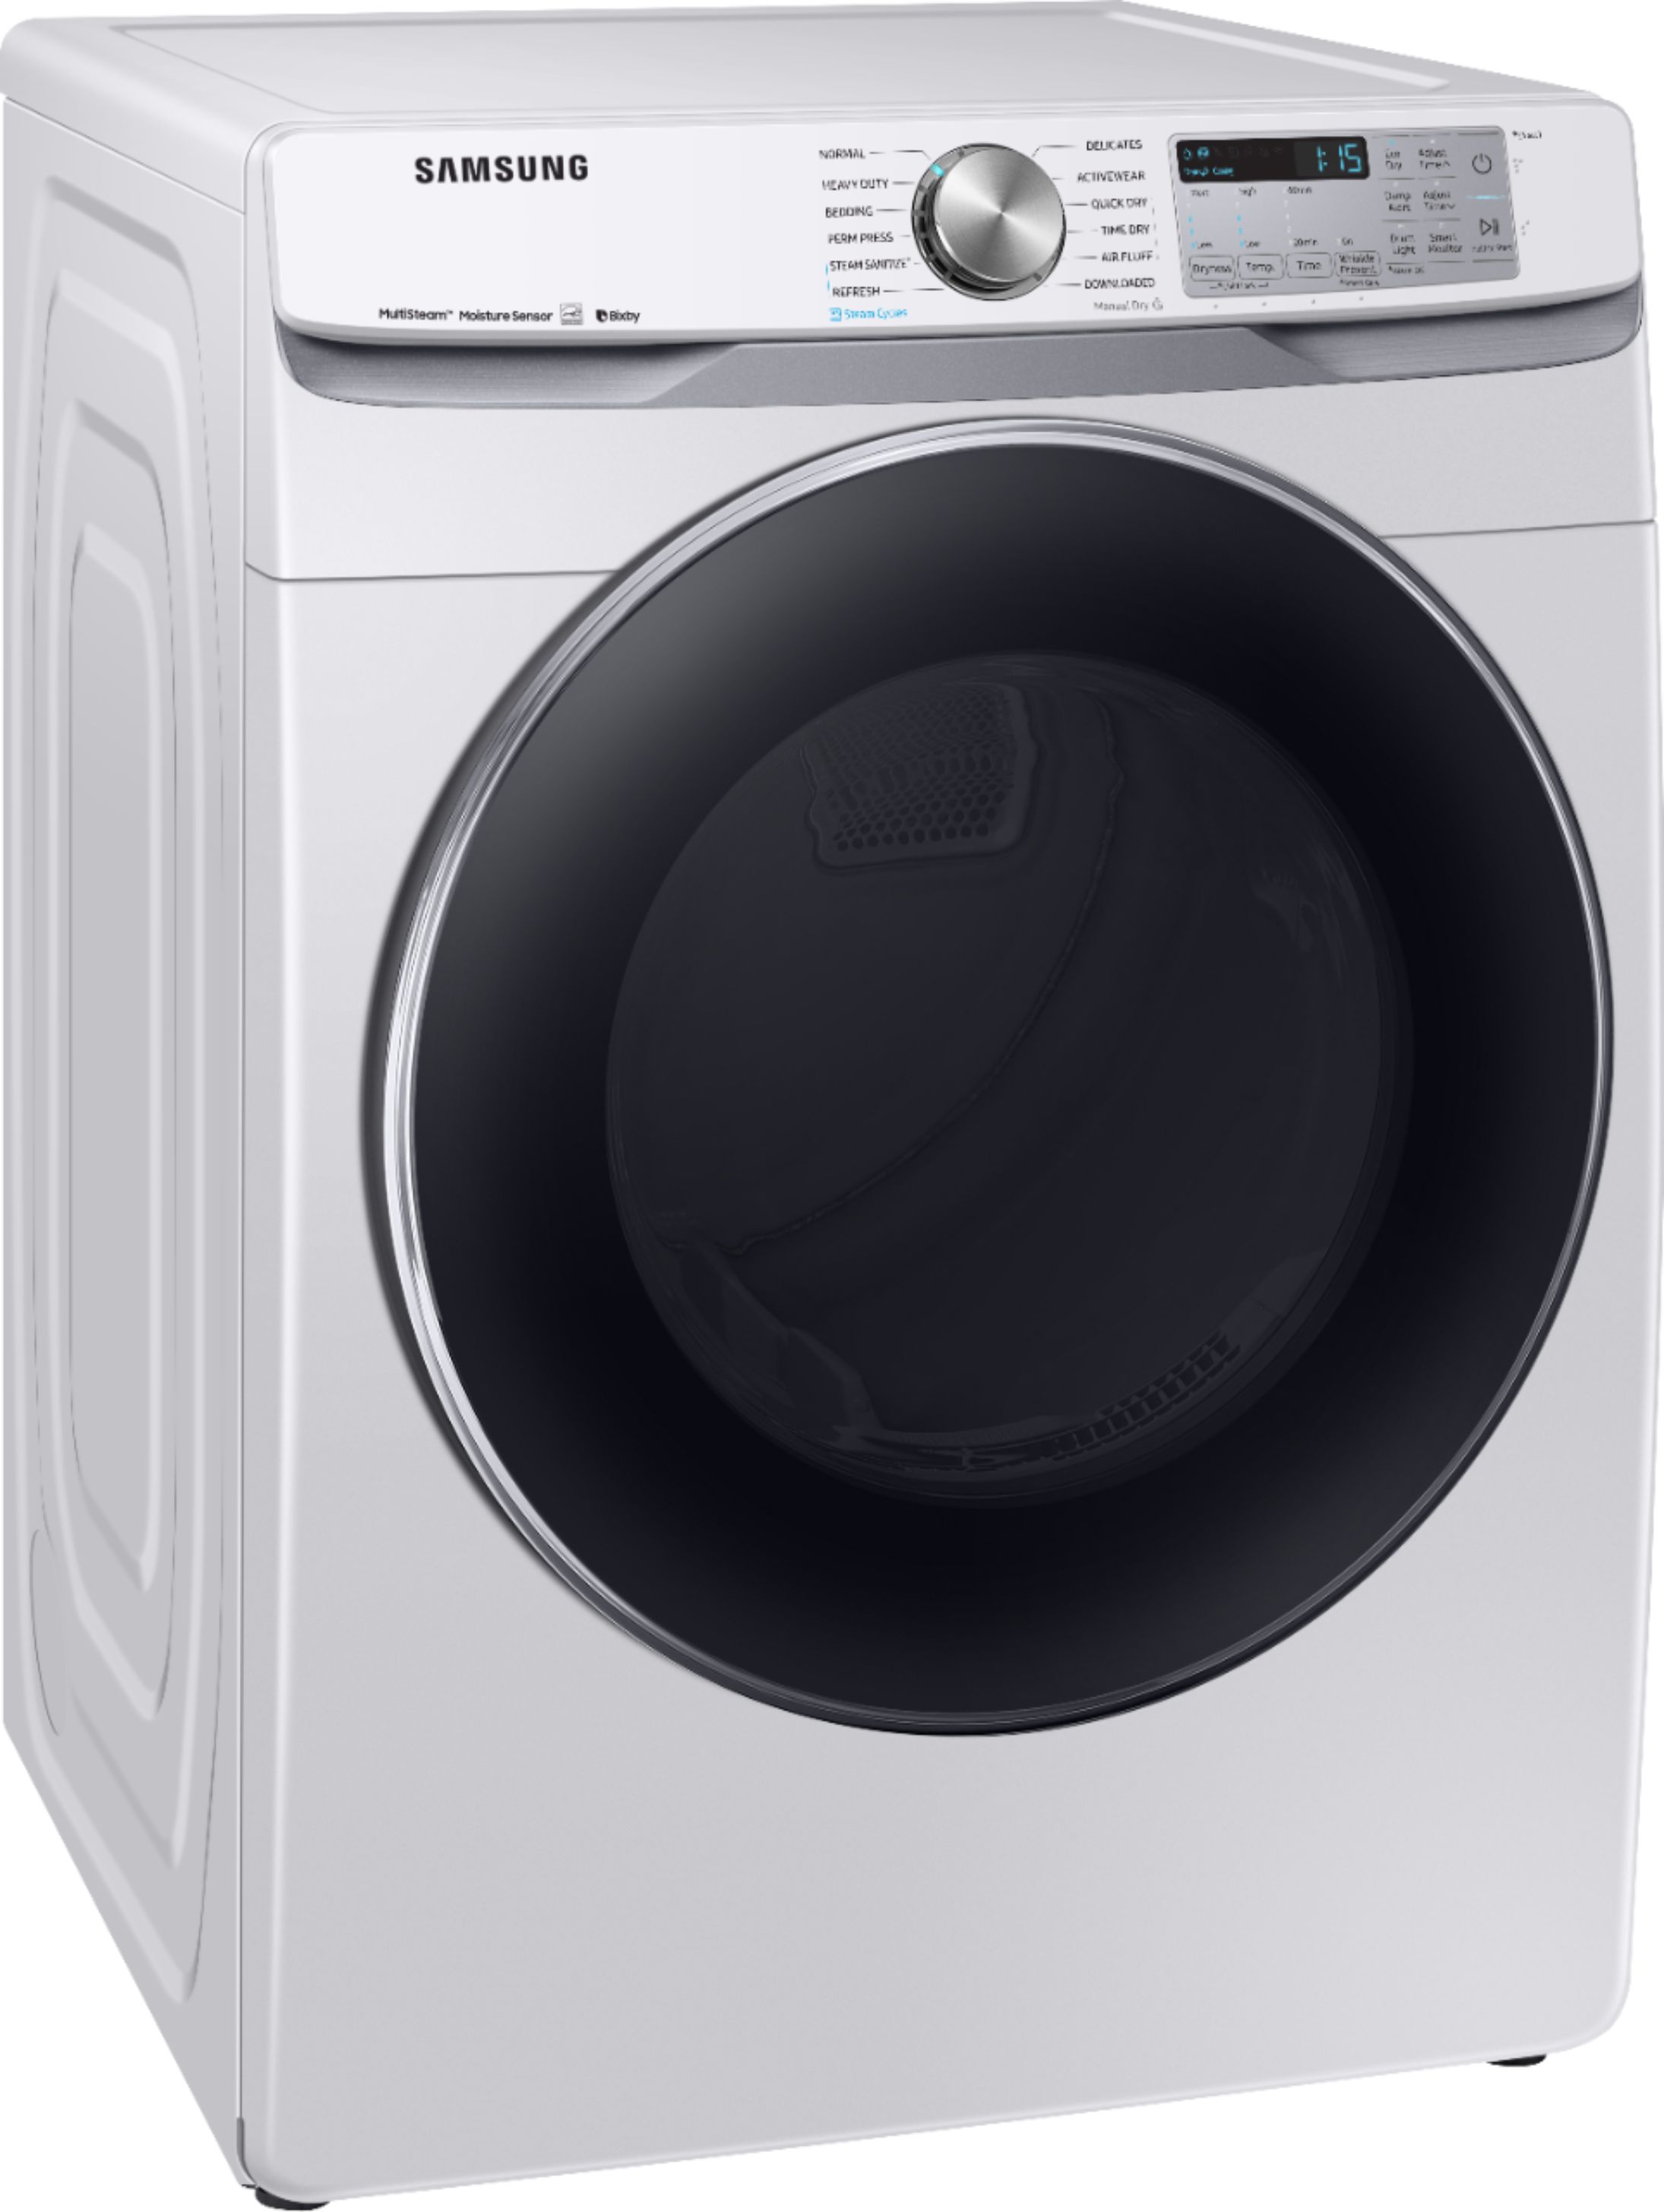 Angle View: Samsung - 7.5 Cu. Ft. Stackable Smart Gas Dryer with Steam and Sensor Dry - White